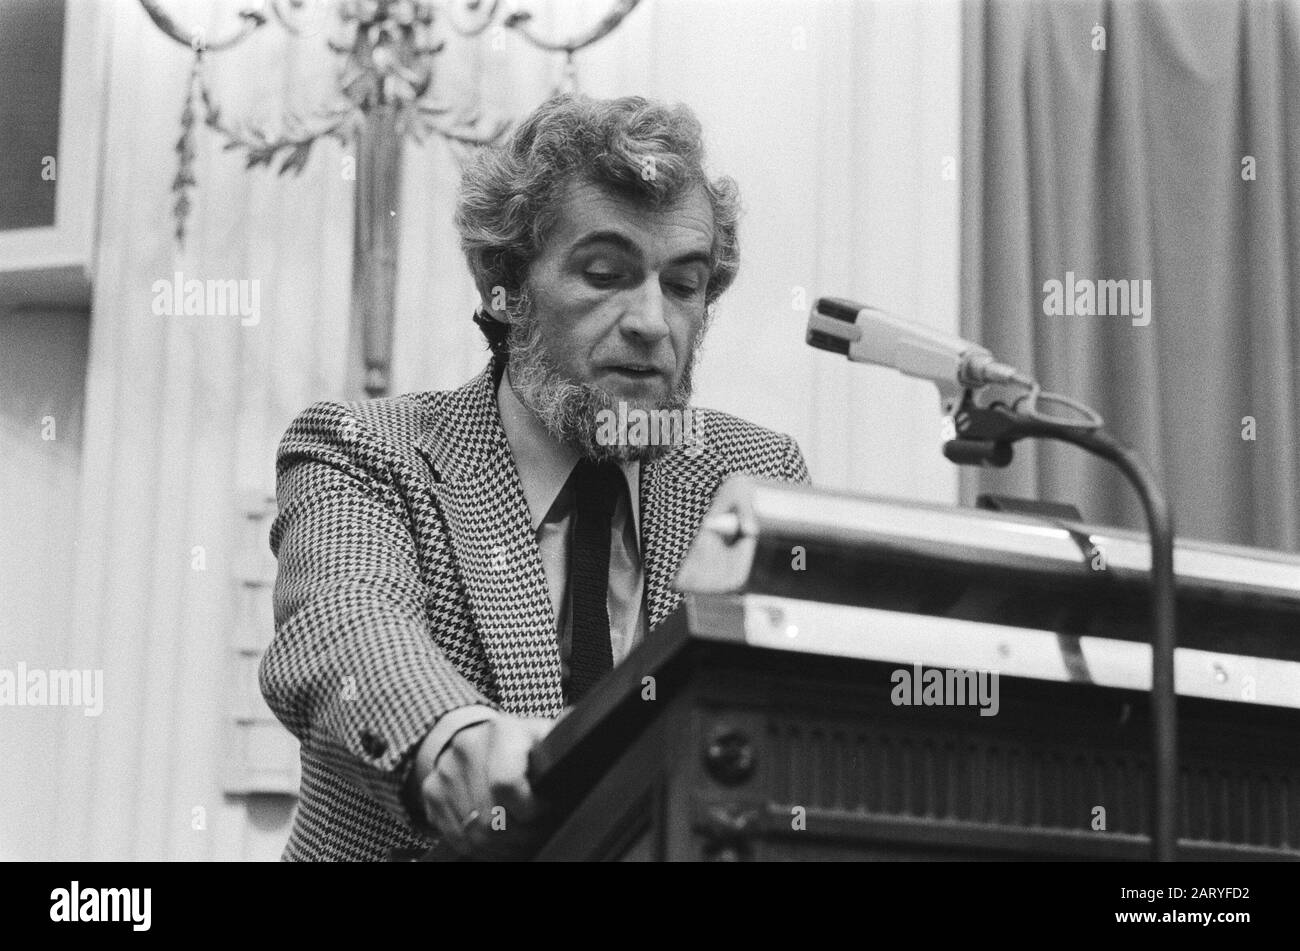 House of Representation of the CDA Member of Parliament B. de Vries as successor of J. Boersma. Jaap van der Doef (PvdA) speaks Date: November 21, 1978 Location: The Hague, Zuid-Holland Keywords: office acceptions, parliamentarians, political Person name: Doef, Jaap van der Institutionname: CDA, PvdA, House Stock Photo